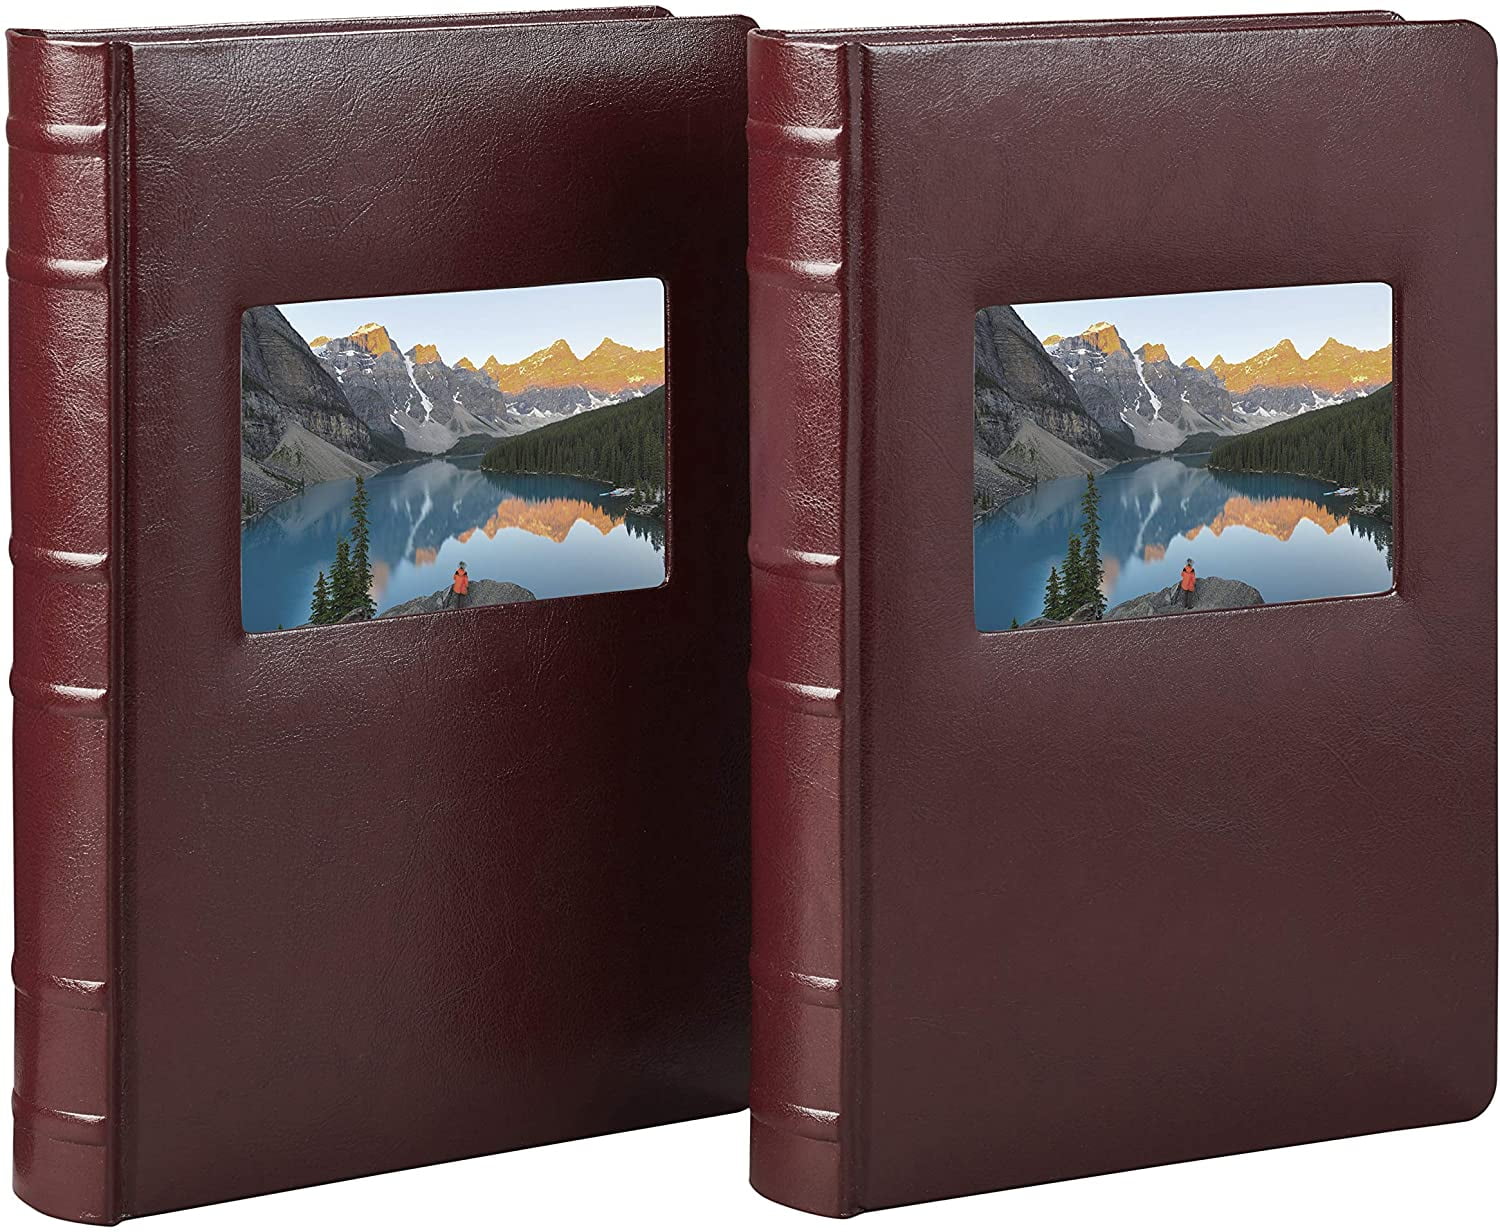 Holds 400 4x6 Photos Old Town Large Photo Albums Leather, Black 